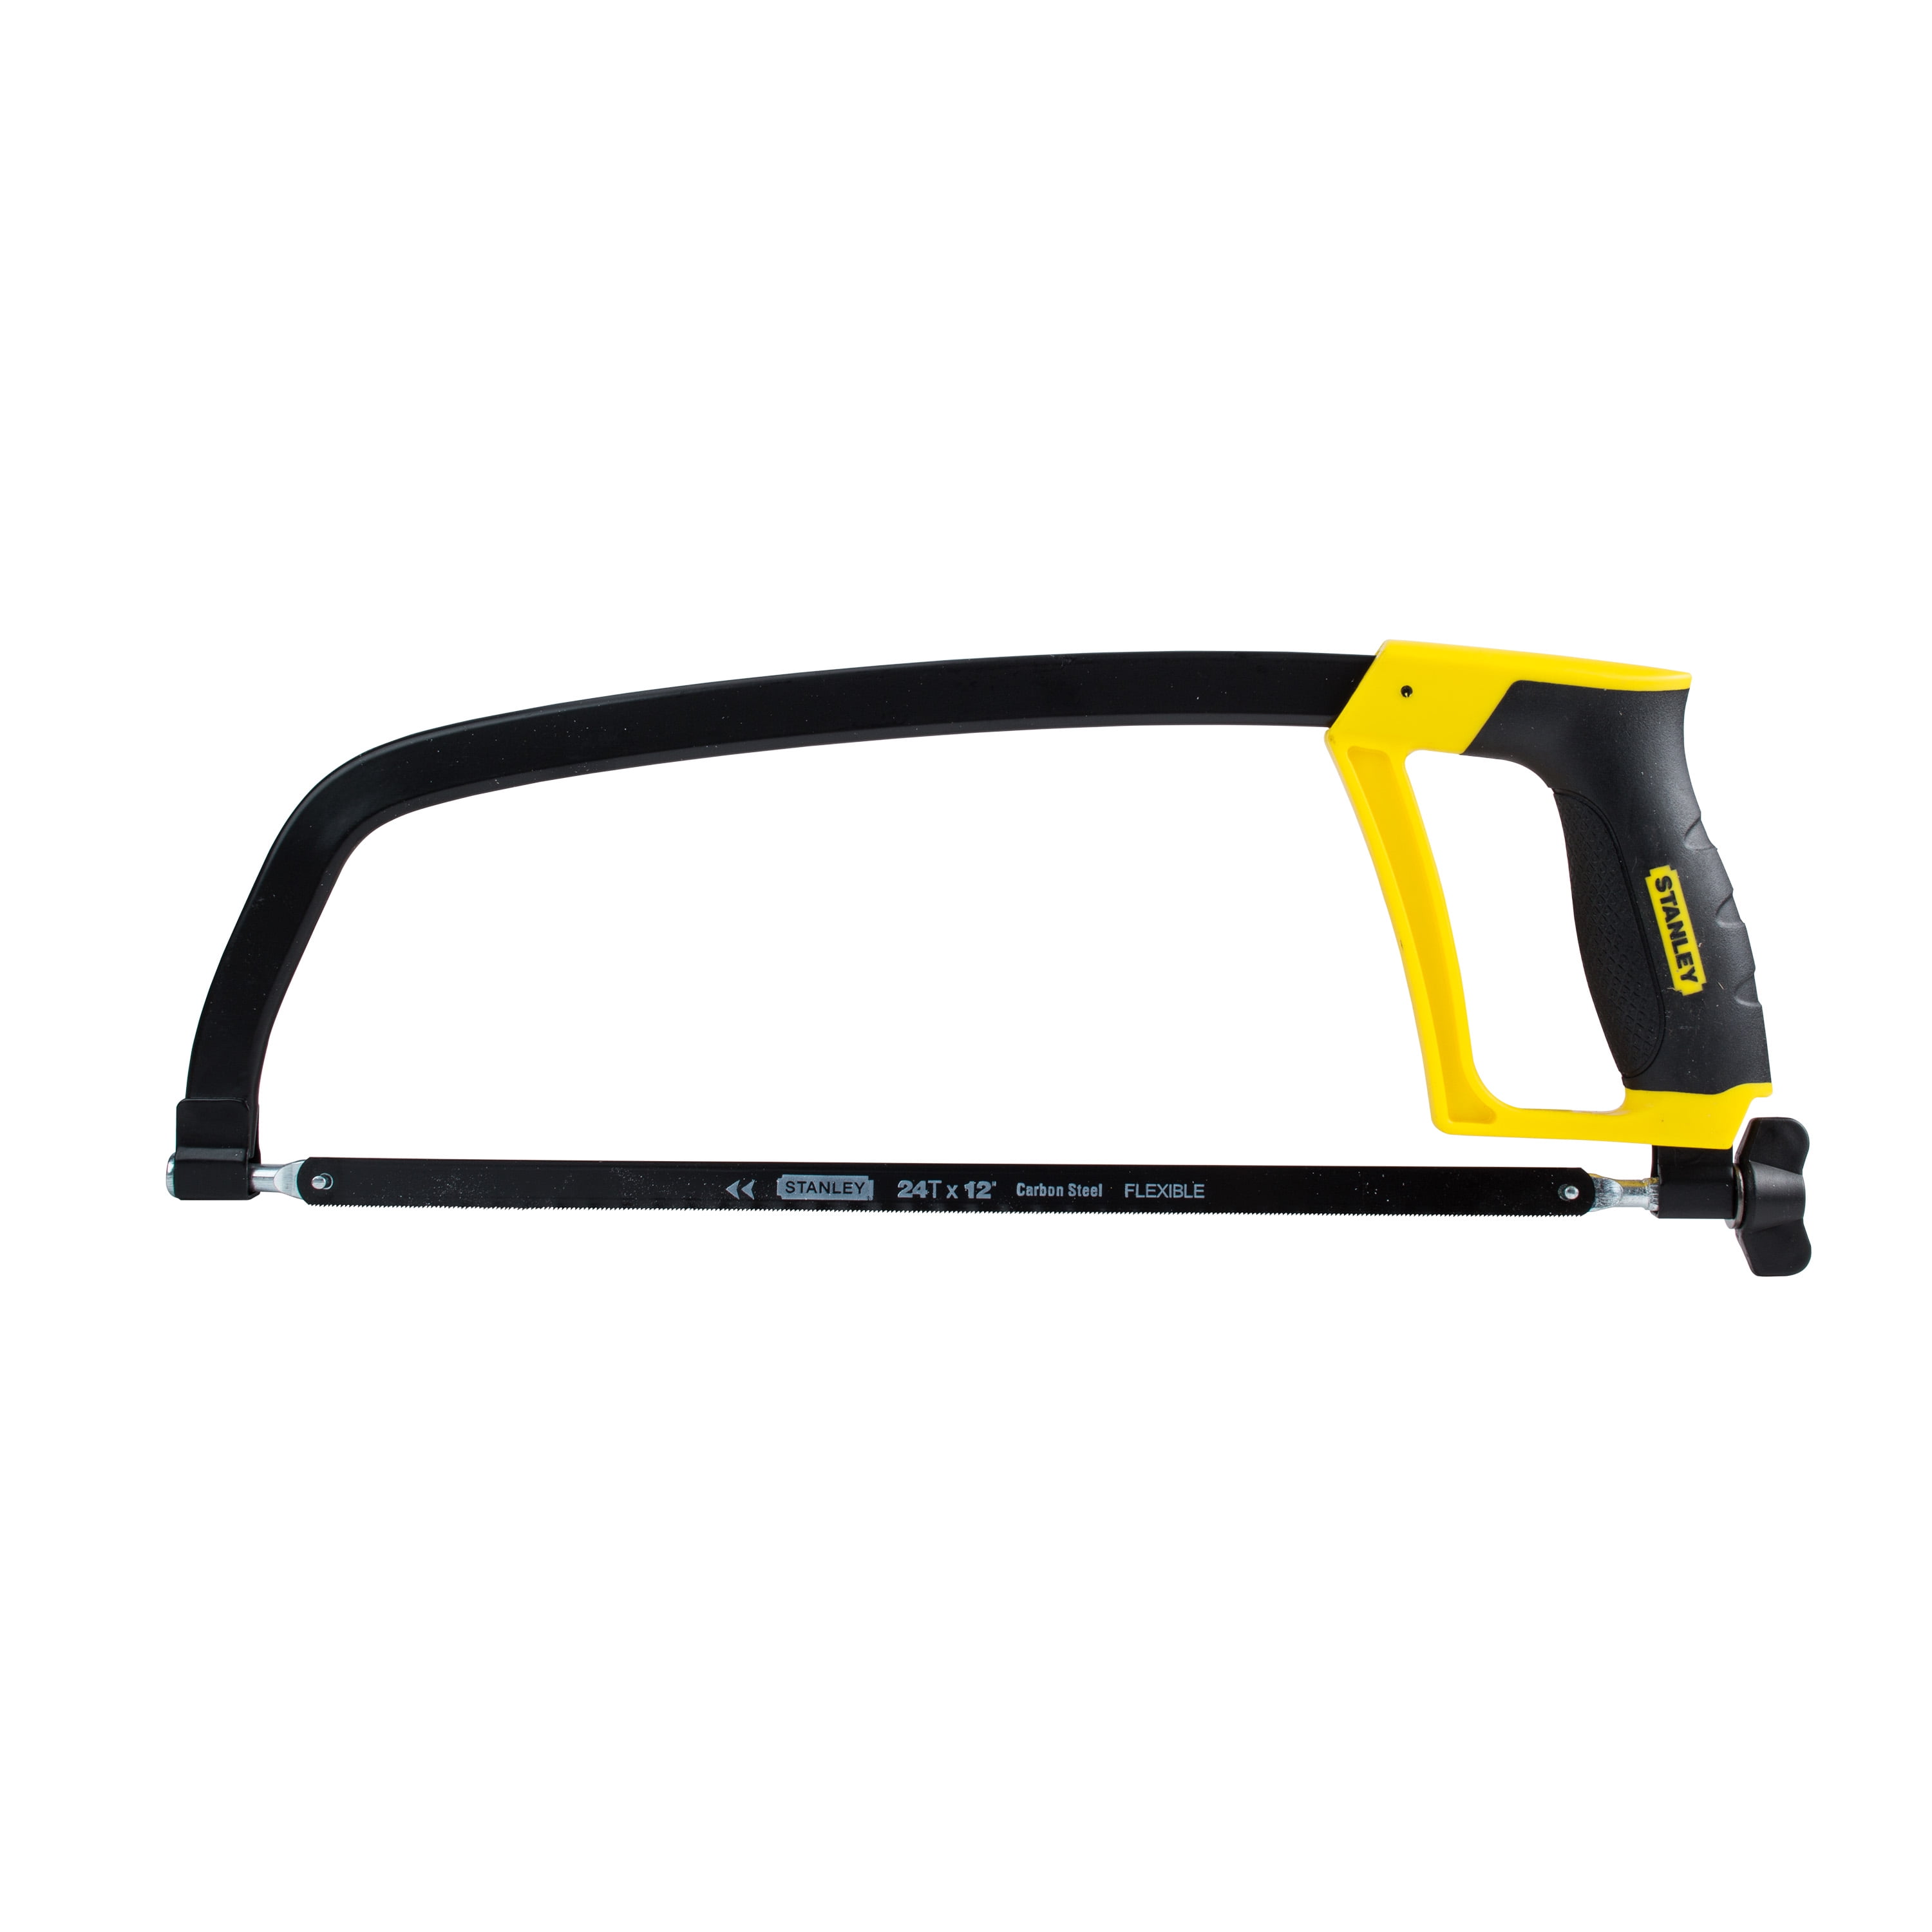 STHT20139L Grip Rubber 12-Inch STANLEY Hacksaw